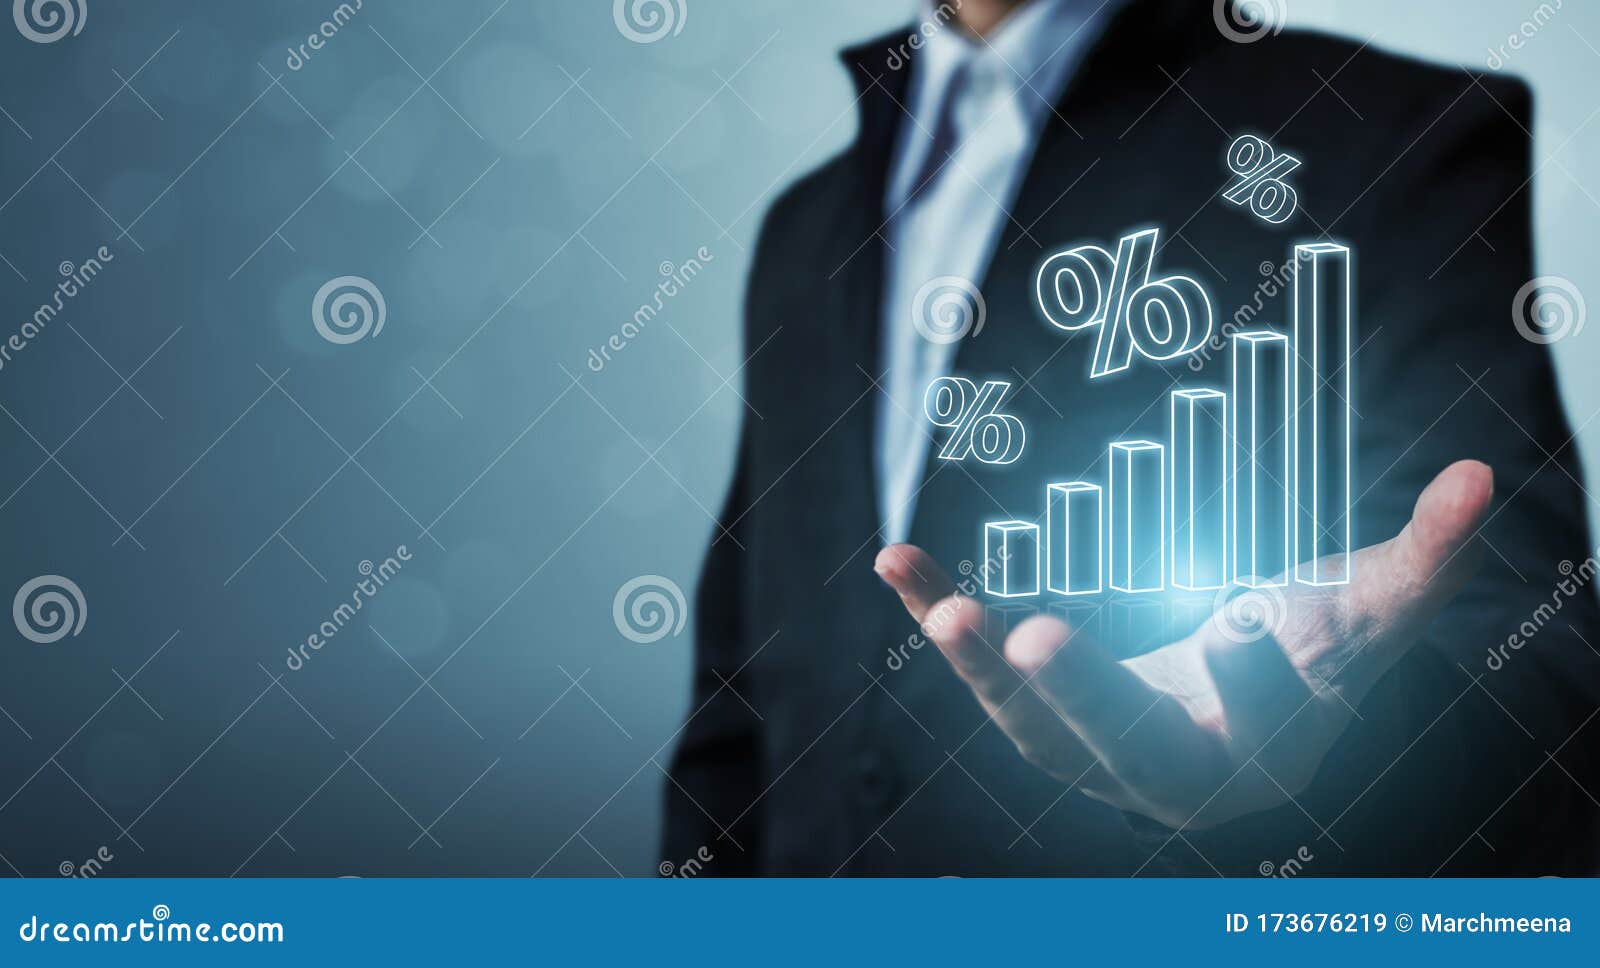 3d Man Analysing Stock Photo, Picture and Royalty Free Image. Image  24488318.